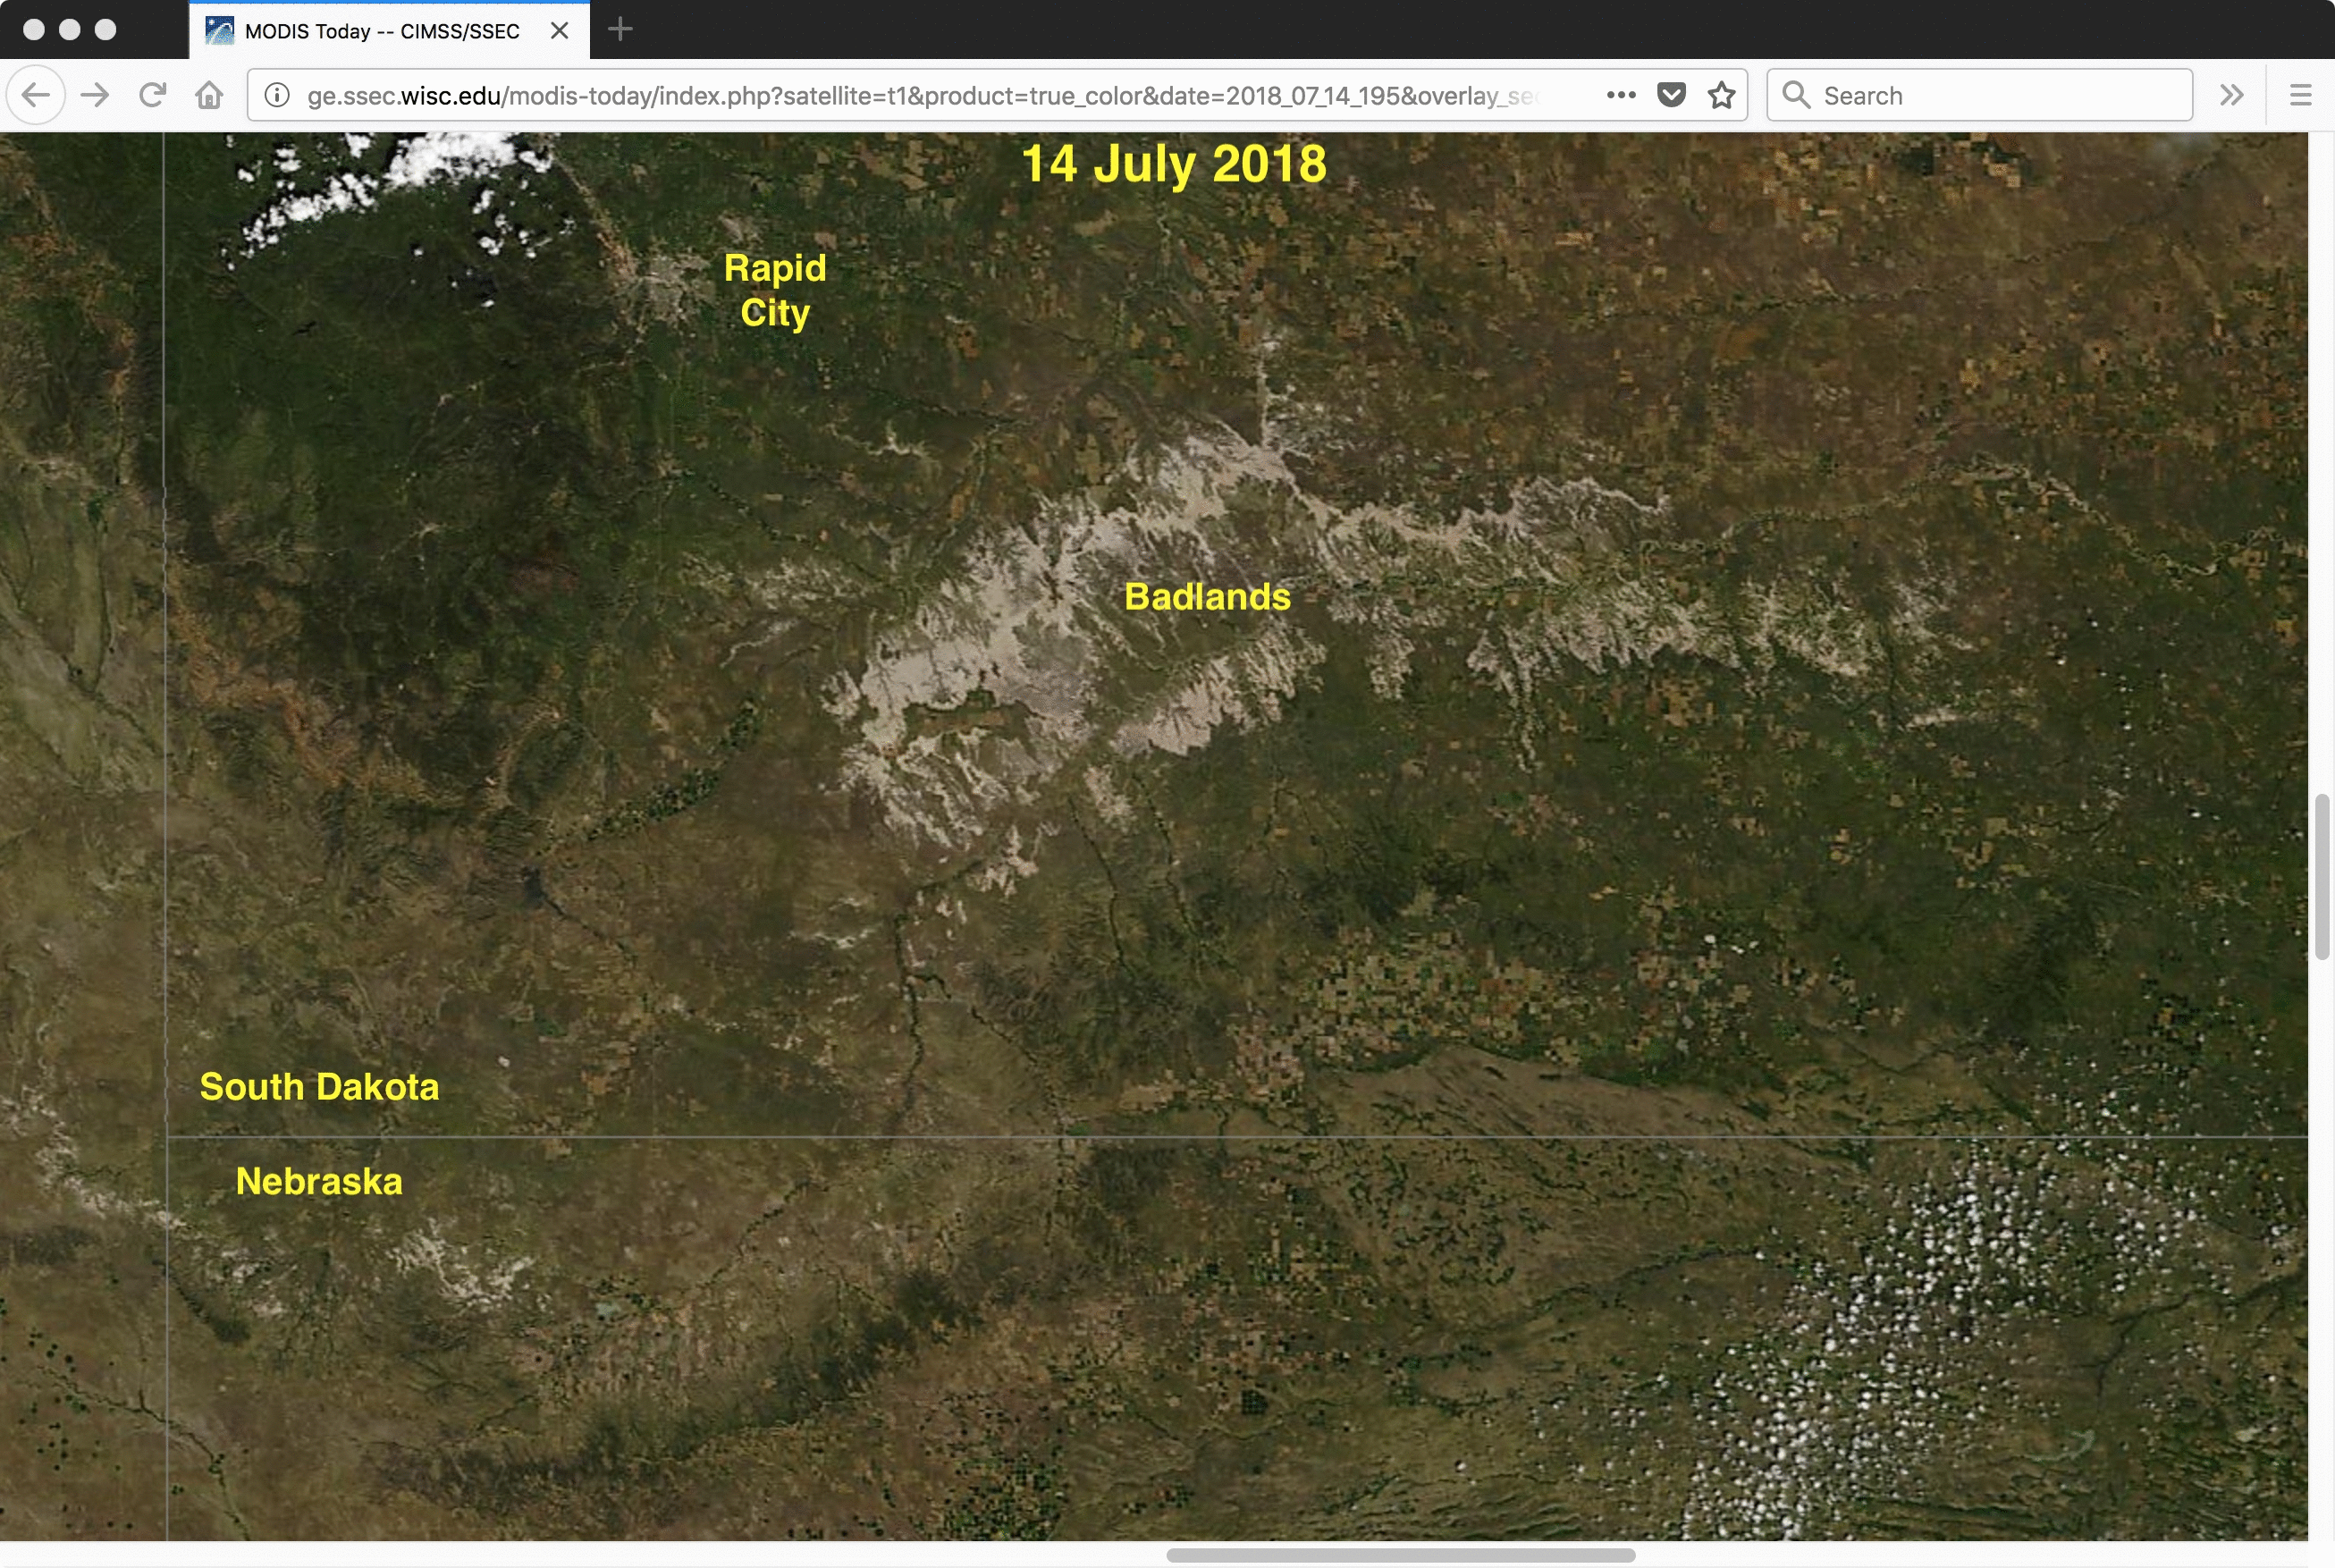 MODIS True Color RGB images from Terra (14 July) and Aqua (31 July) [click to enlarge]